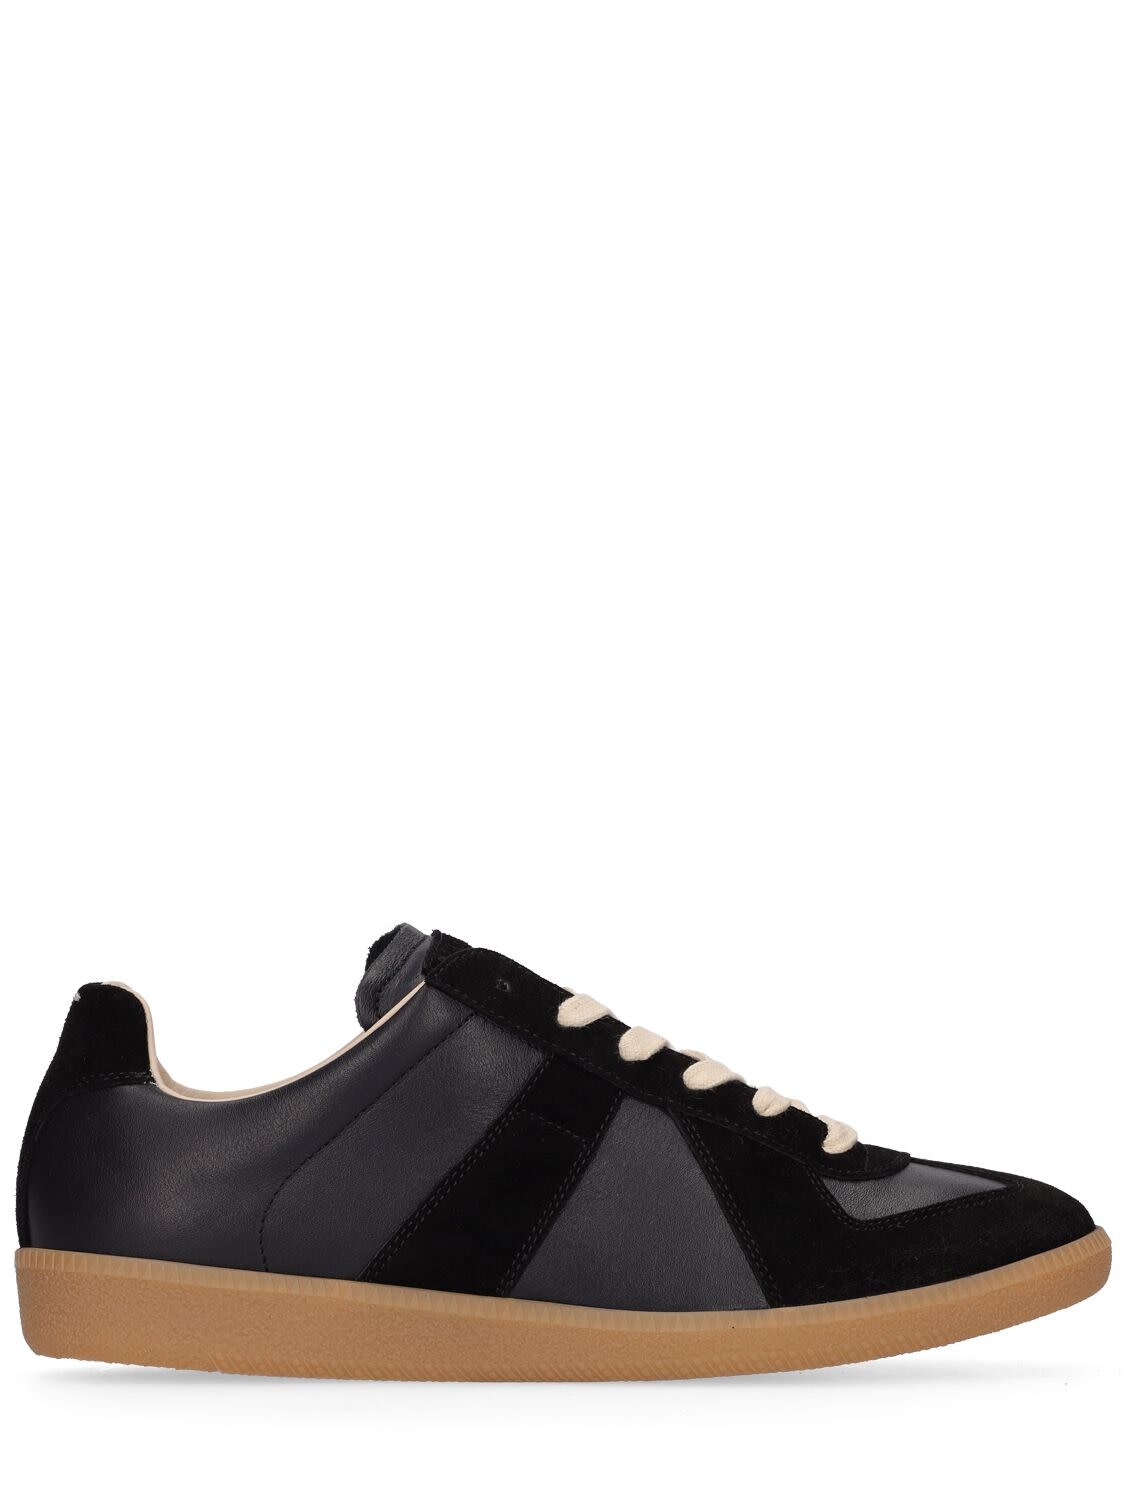 Maison Margiela Replica Leather & Suede Low Top Trainers In Black